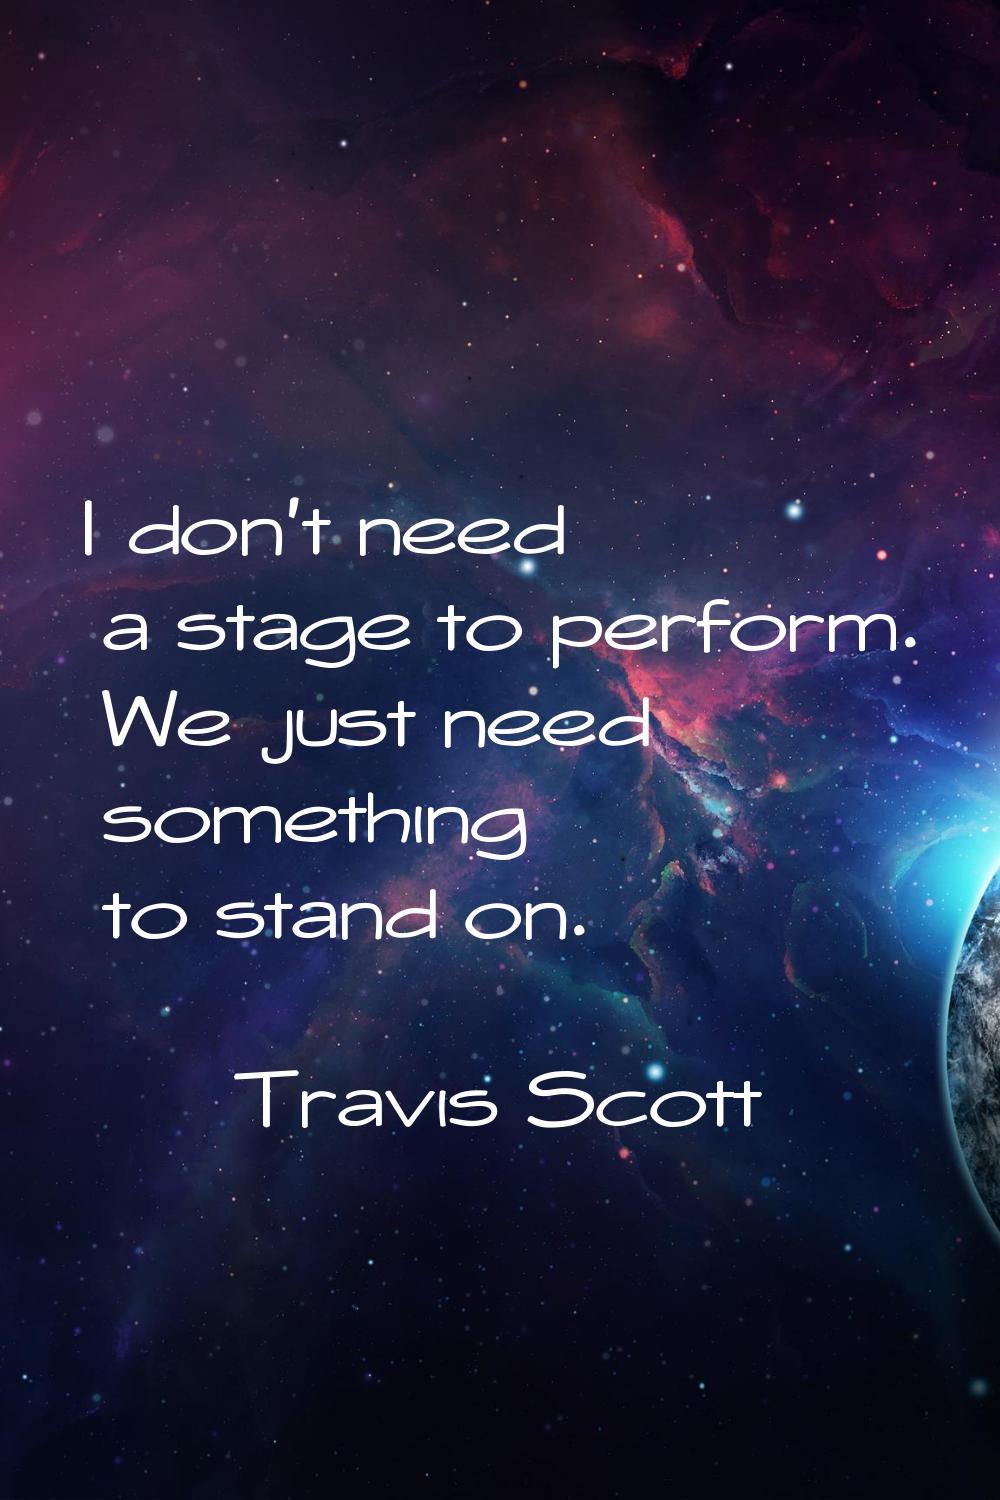 I don't need a stage to perform. We just need something to stand on.